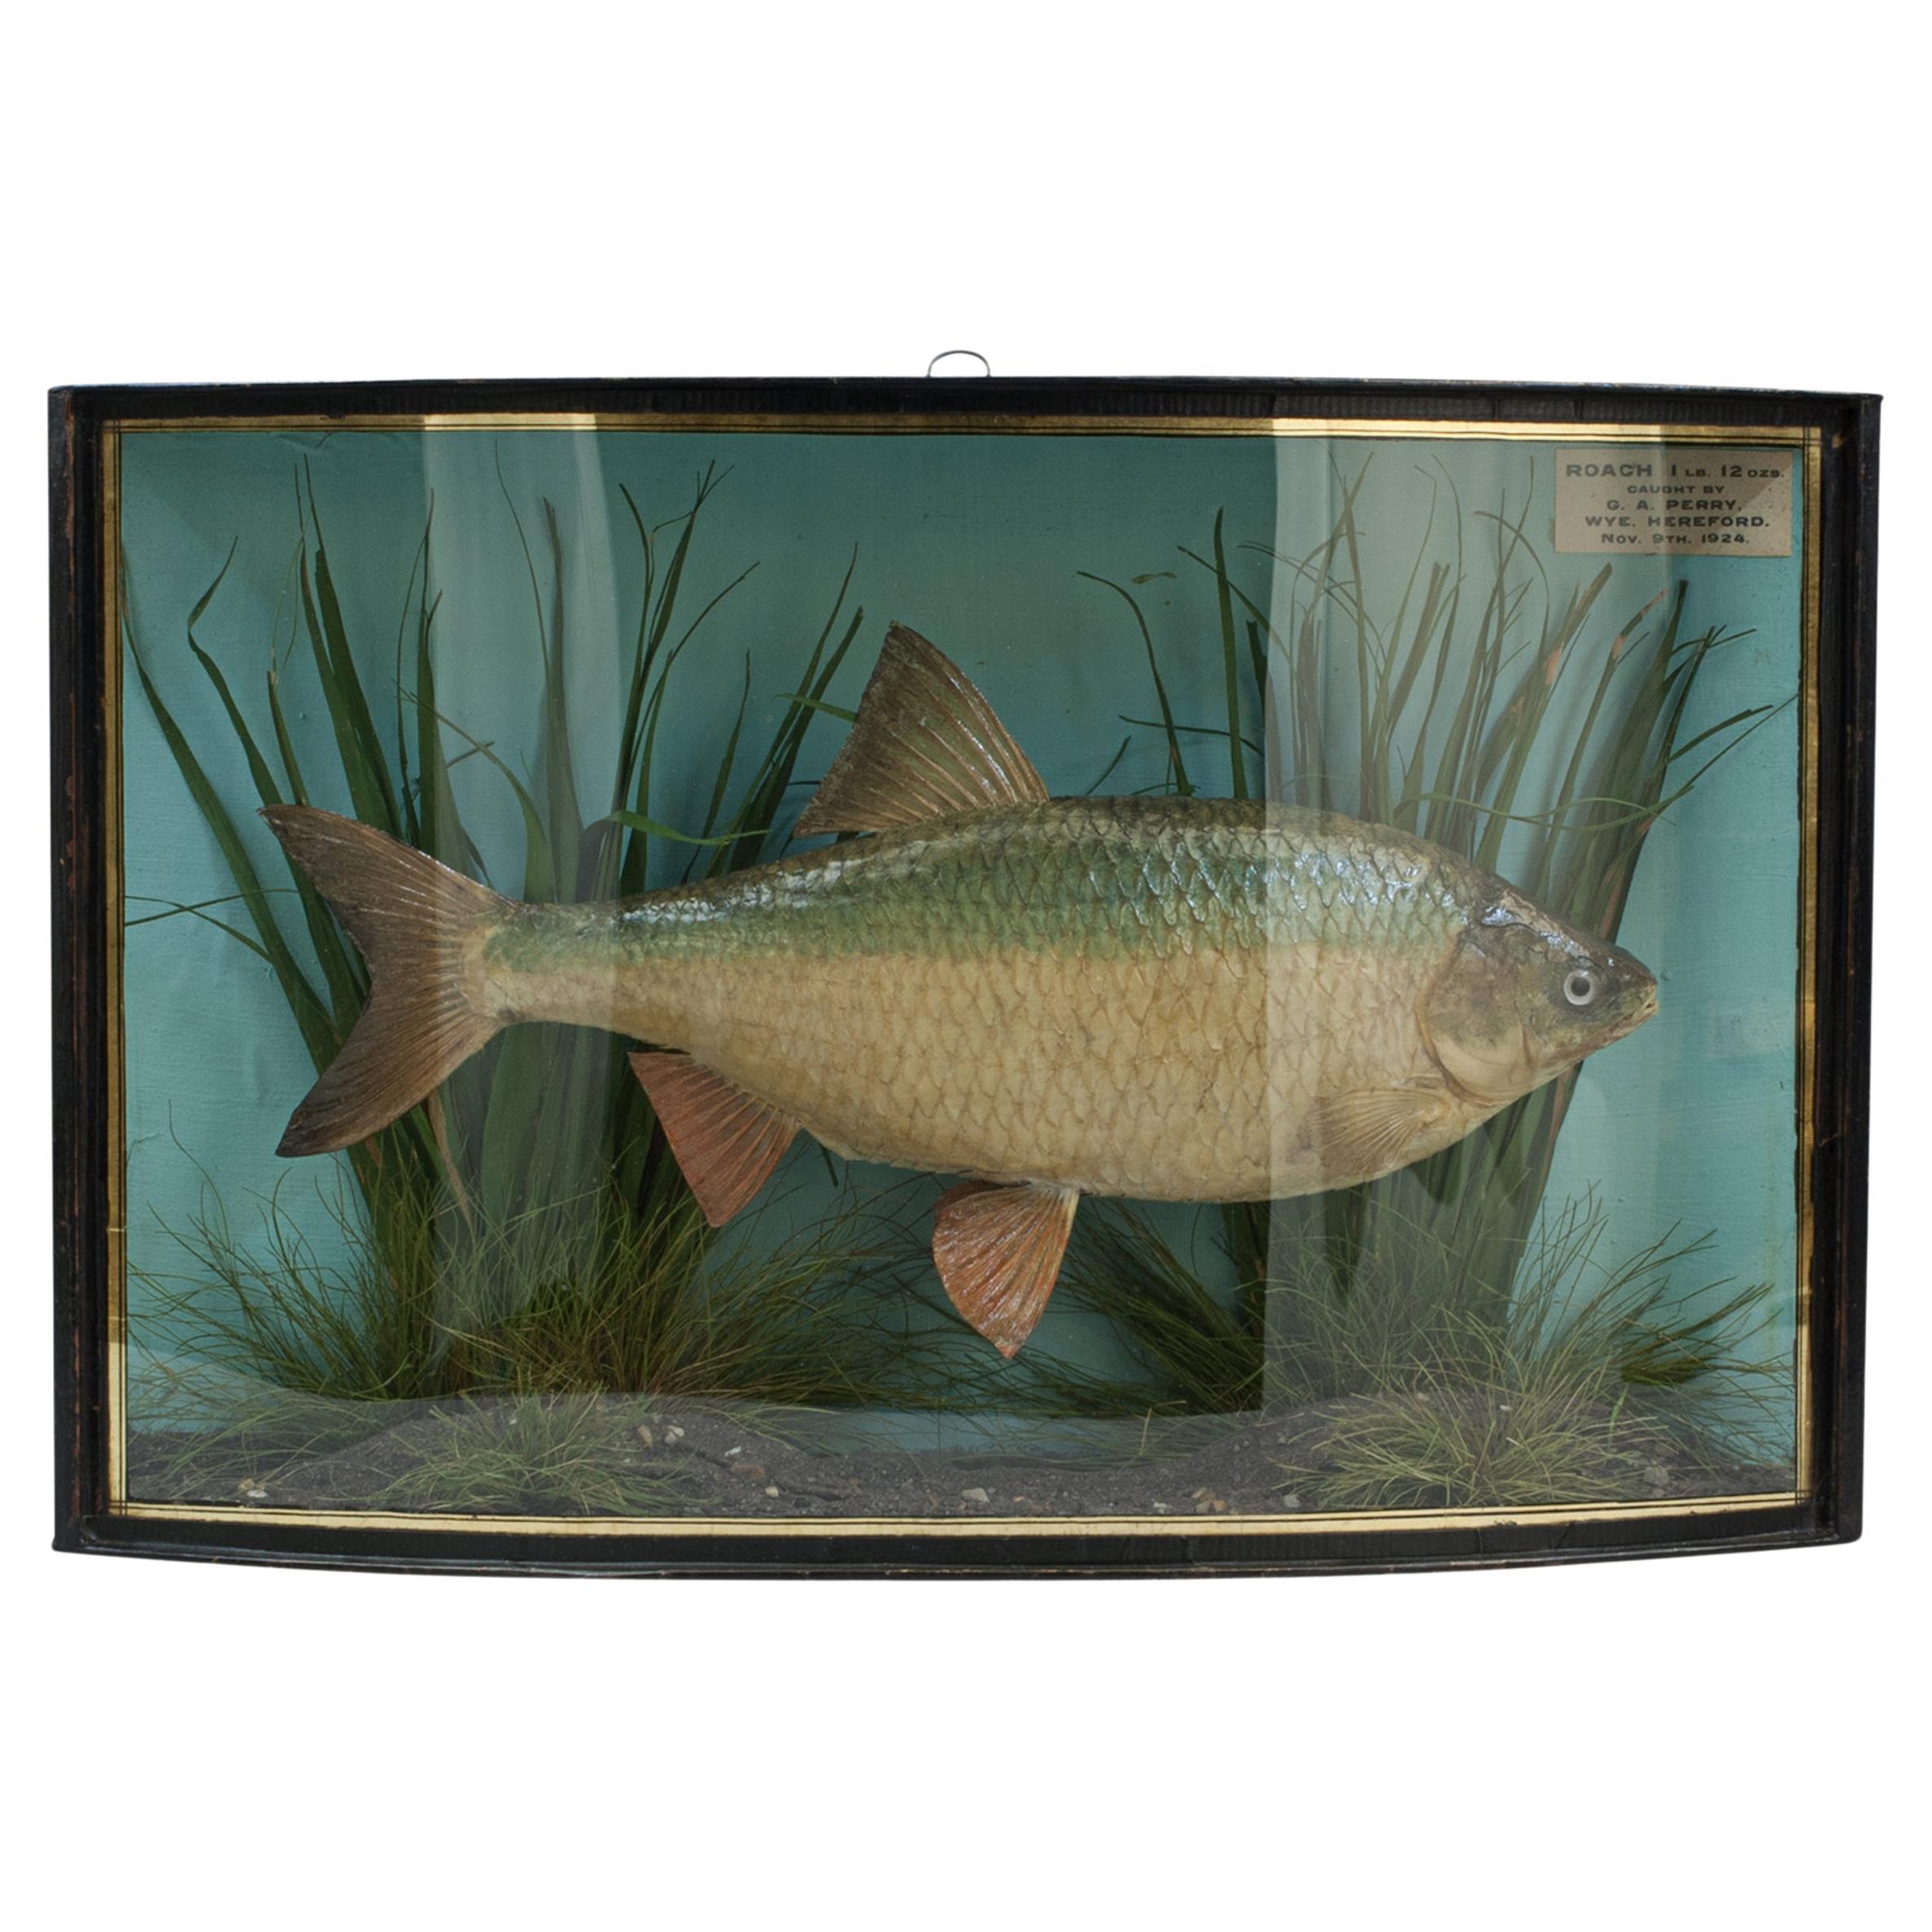 Fish Pepared in Bow Fronted Case, Roach